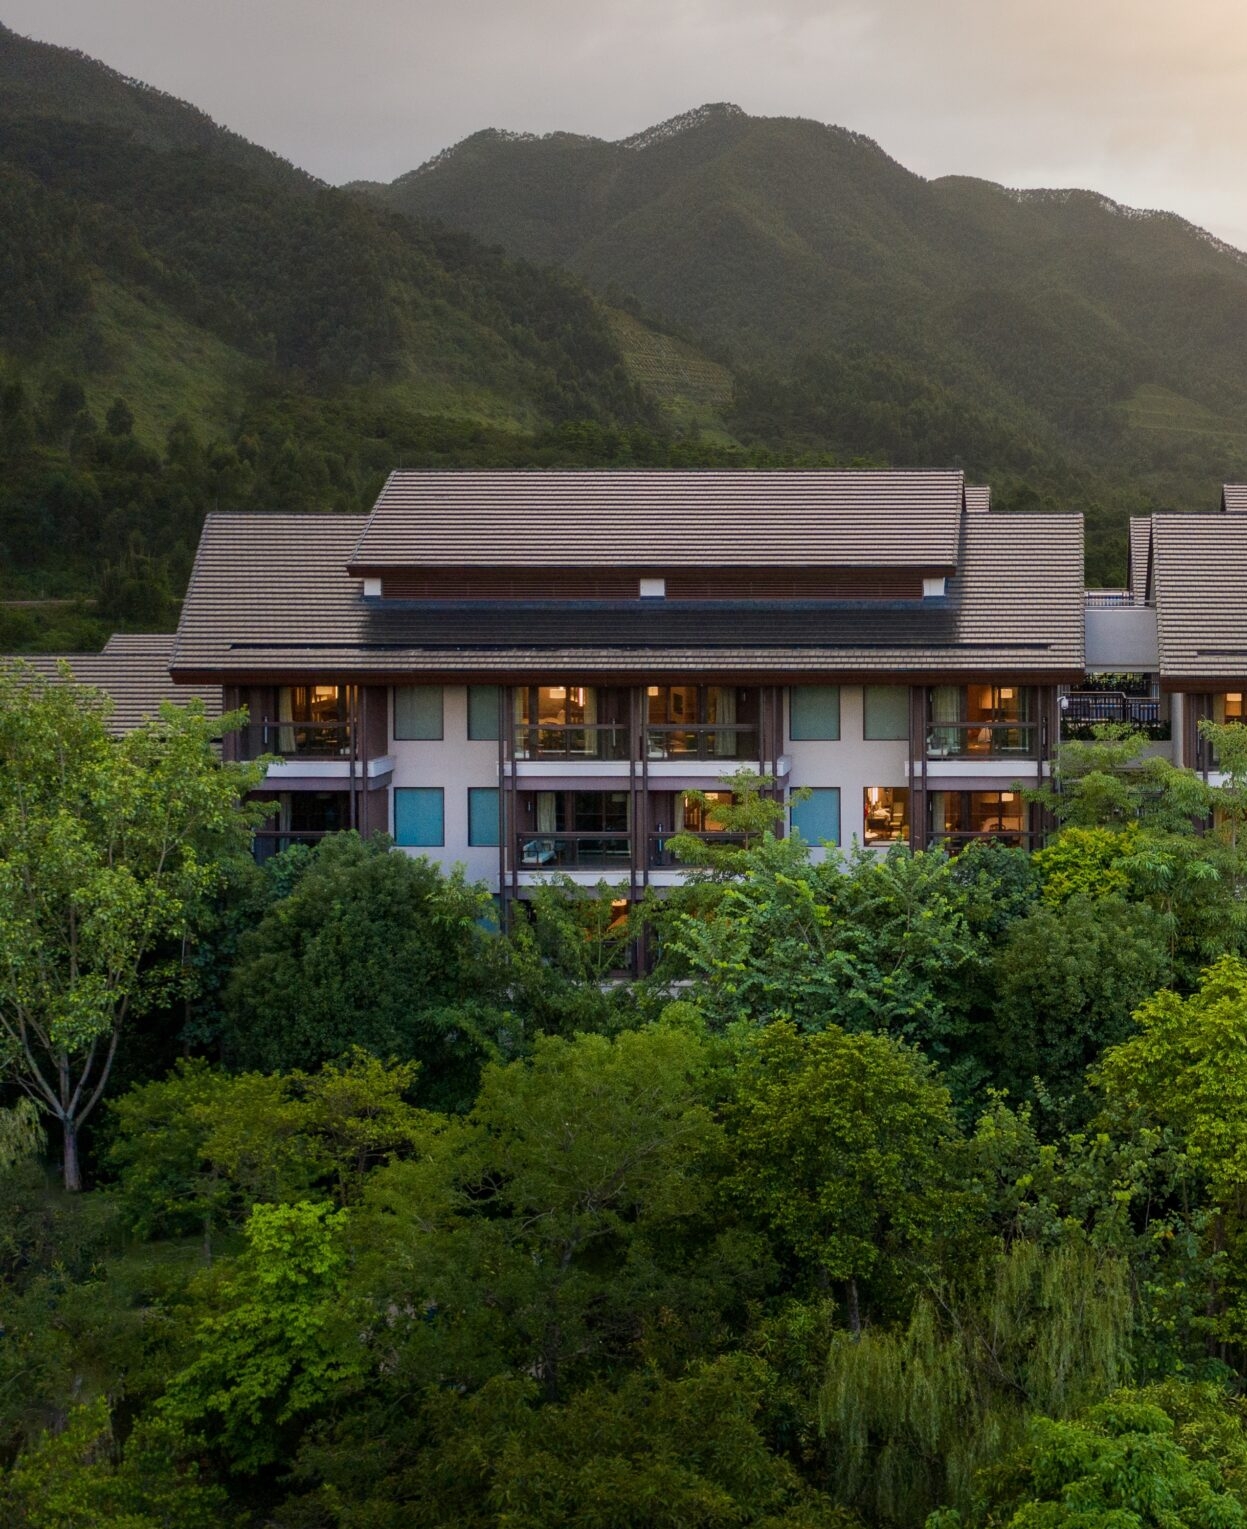 The rise of rural travel in China | New World Qingyuan Hotel, set in a lush rainforest